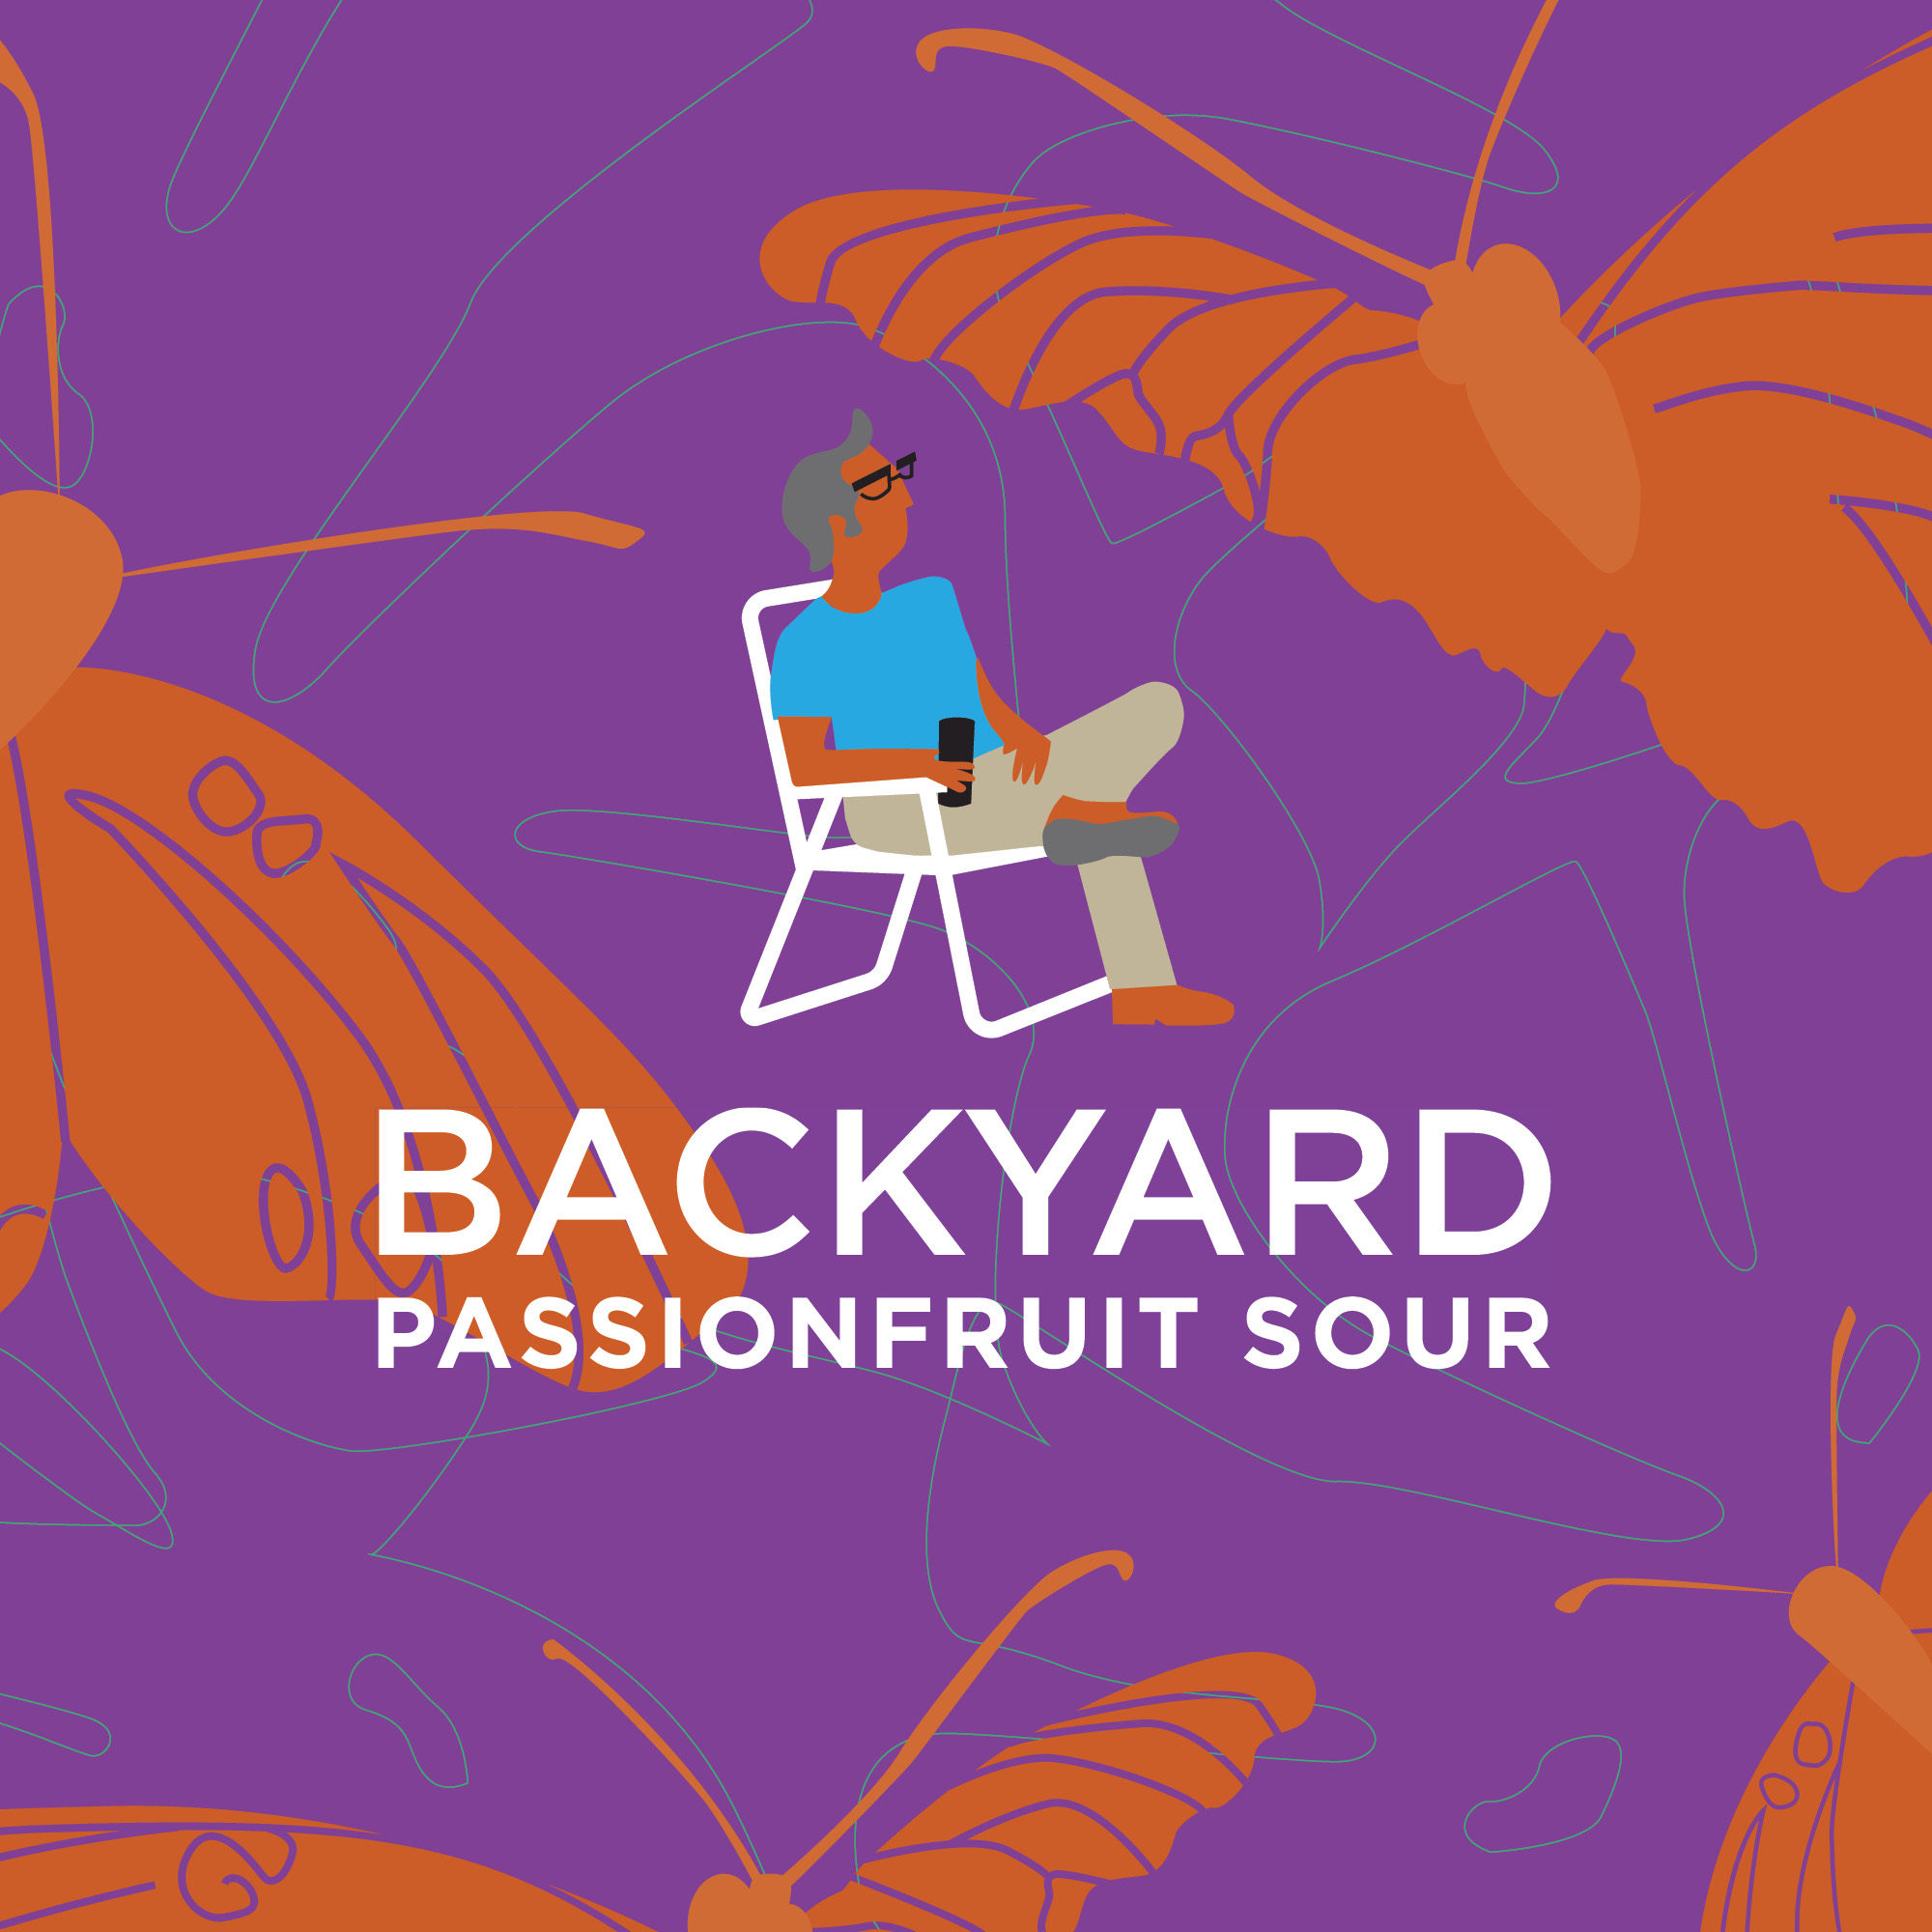 Backyard Passionfruit Sour logo - person sitting in a lawn chair with a beer set against a background of line drawings of butterflies in orange and purple.